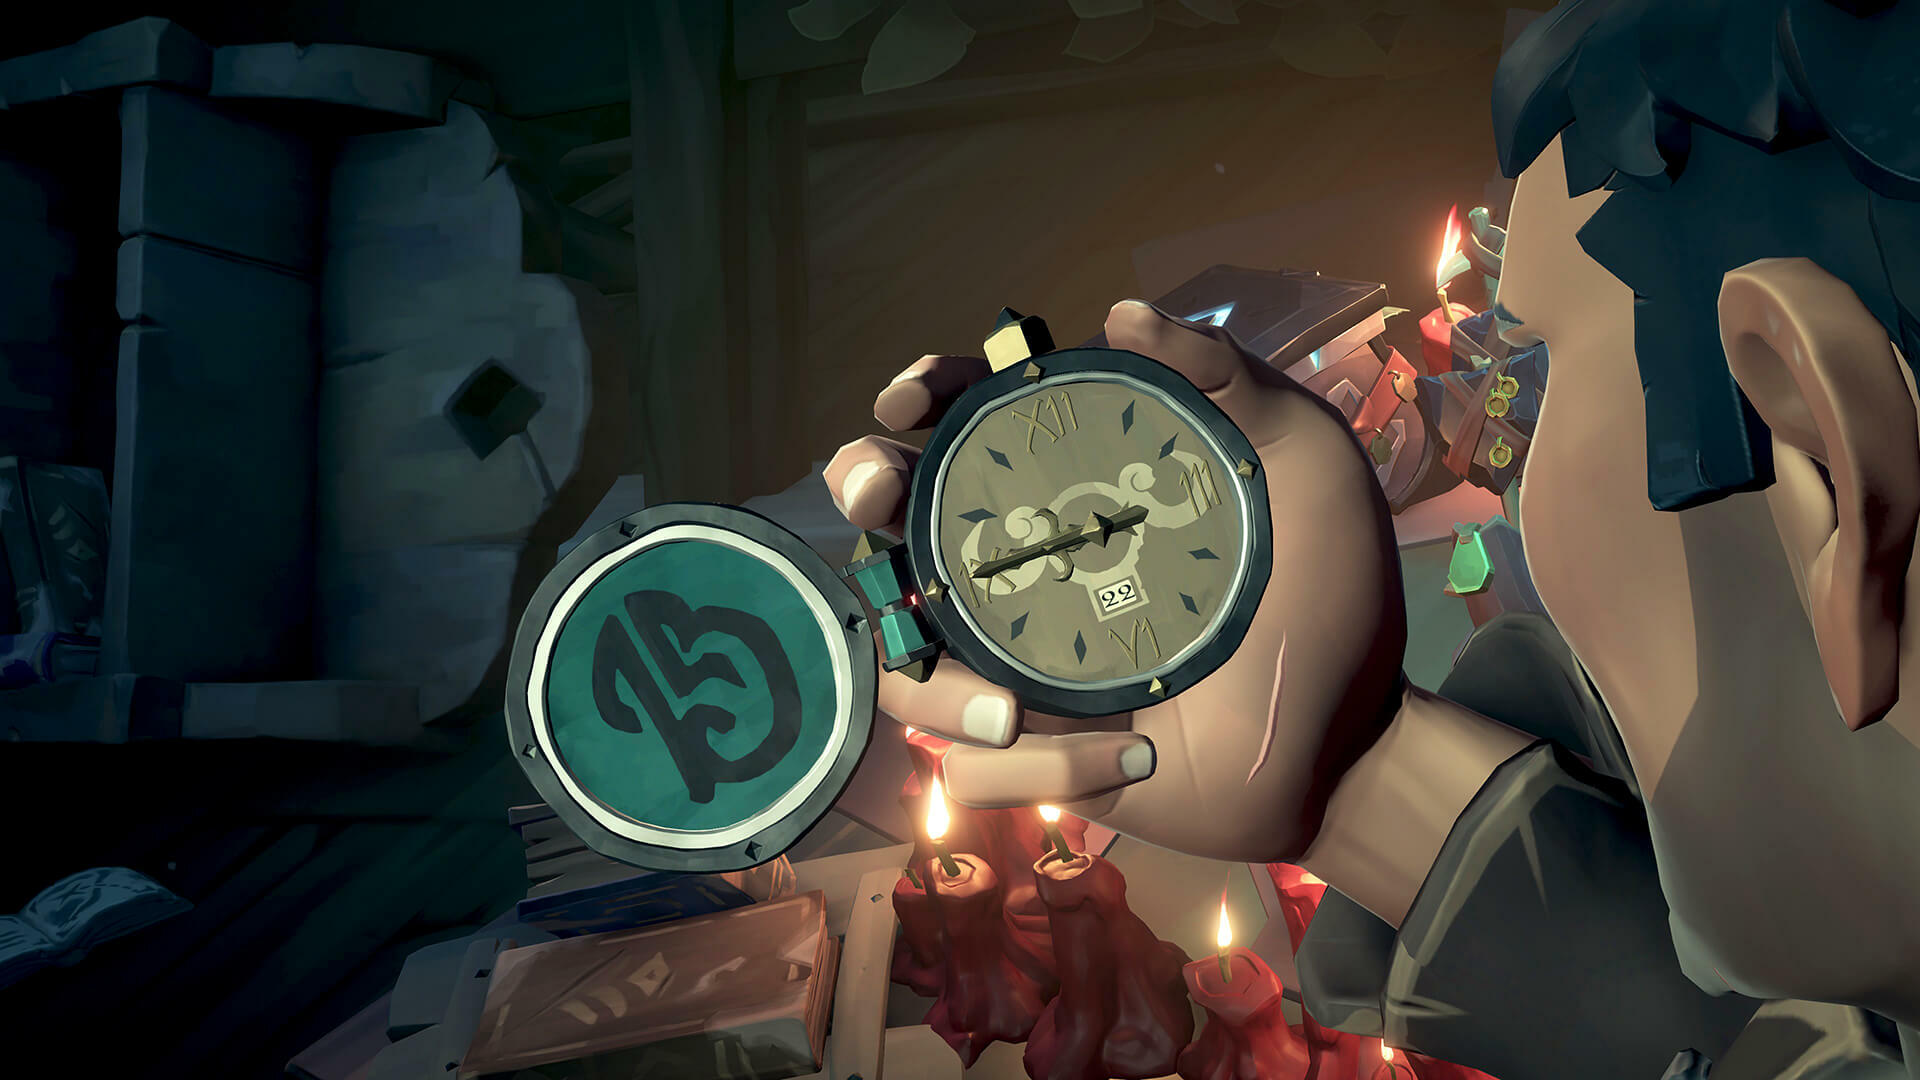 Sea of Thieves adding cats (in hats) and a new trading company in